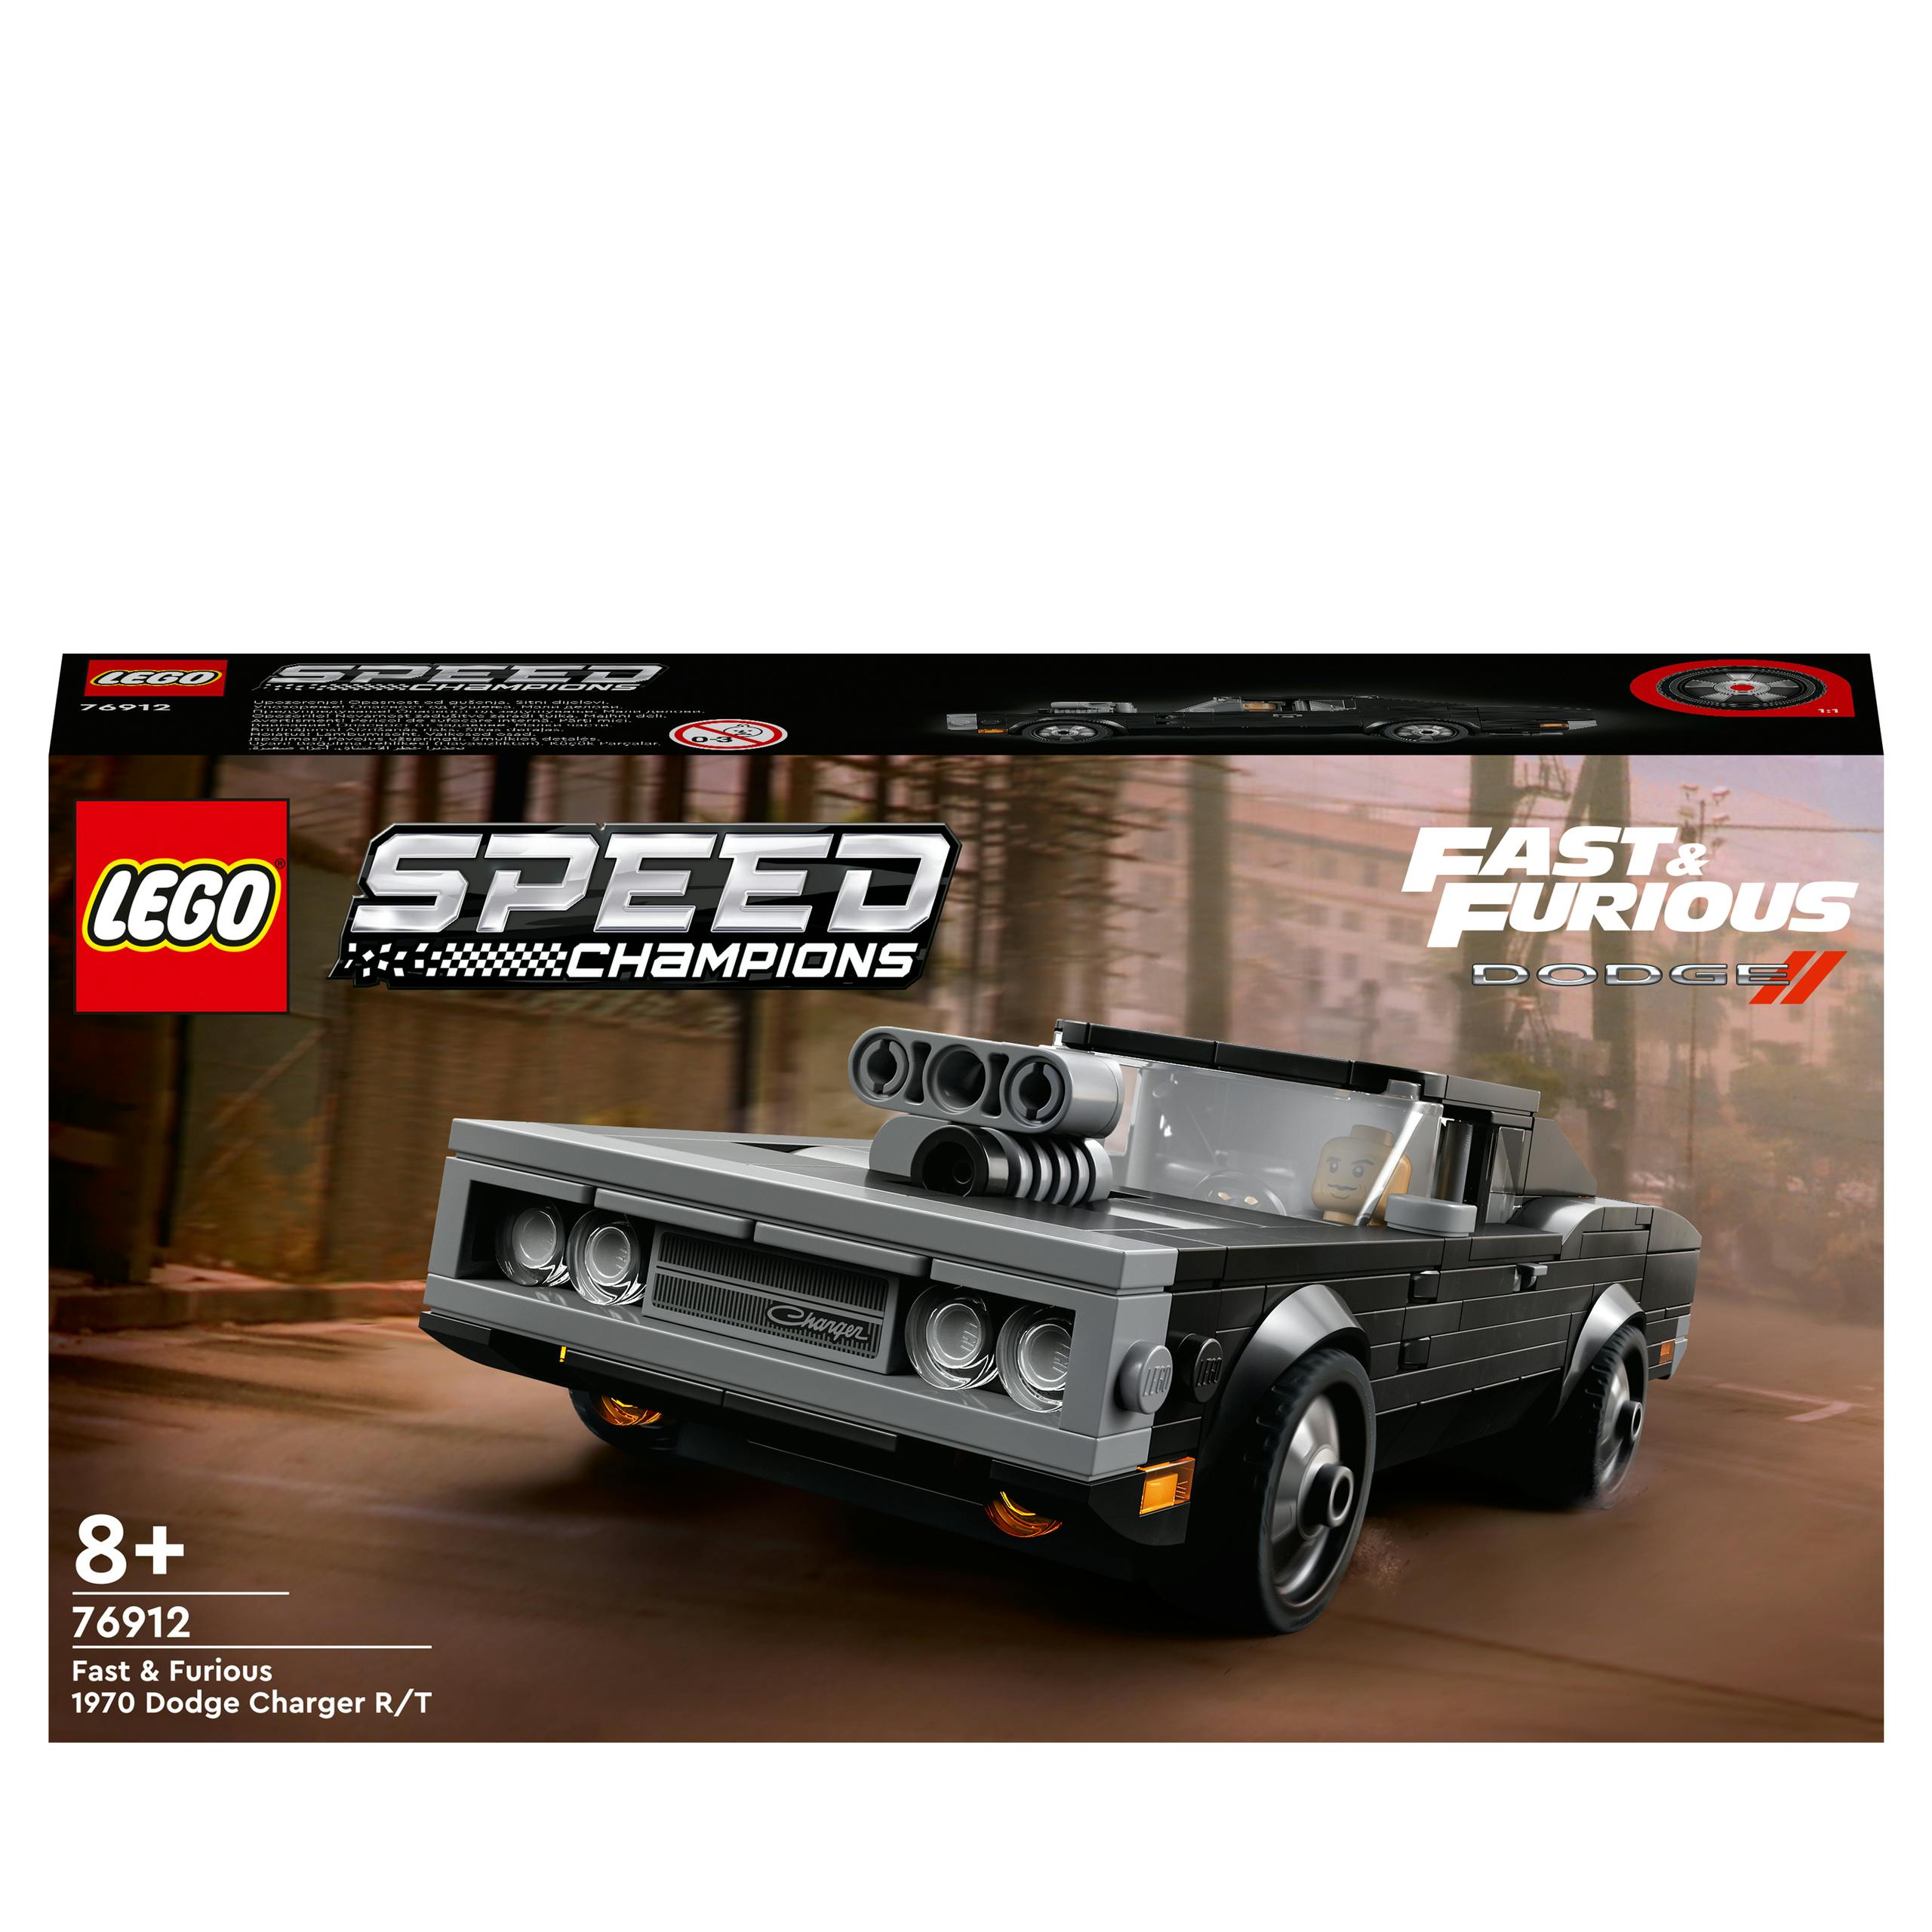 LEGO Speed Champions Fast & Furious 1970 Dodge Charger (76912)